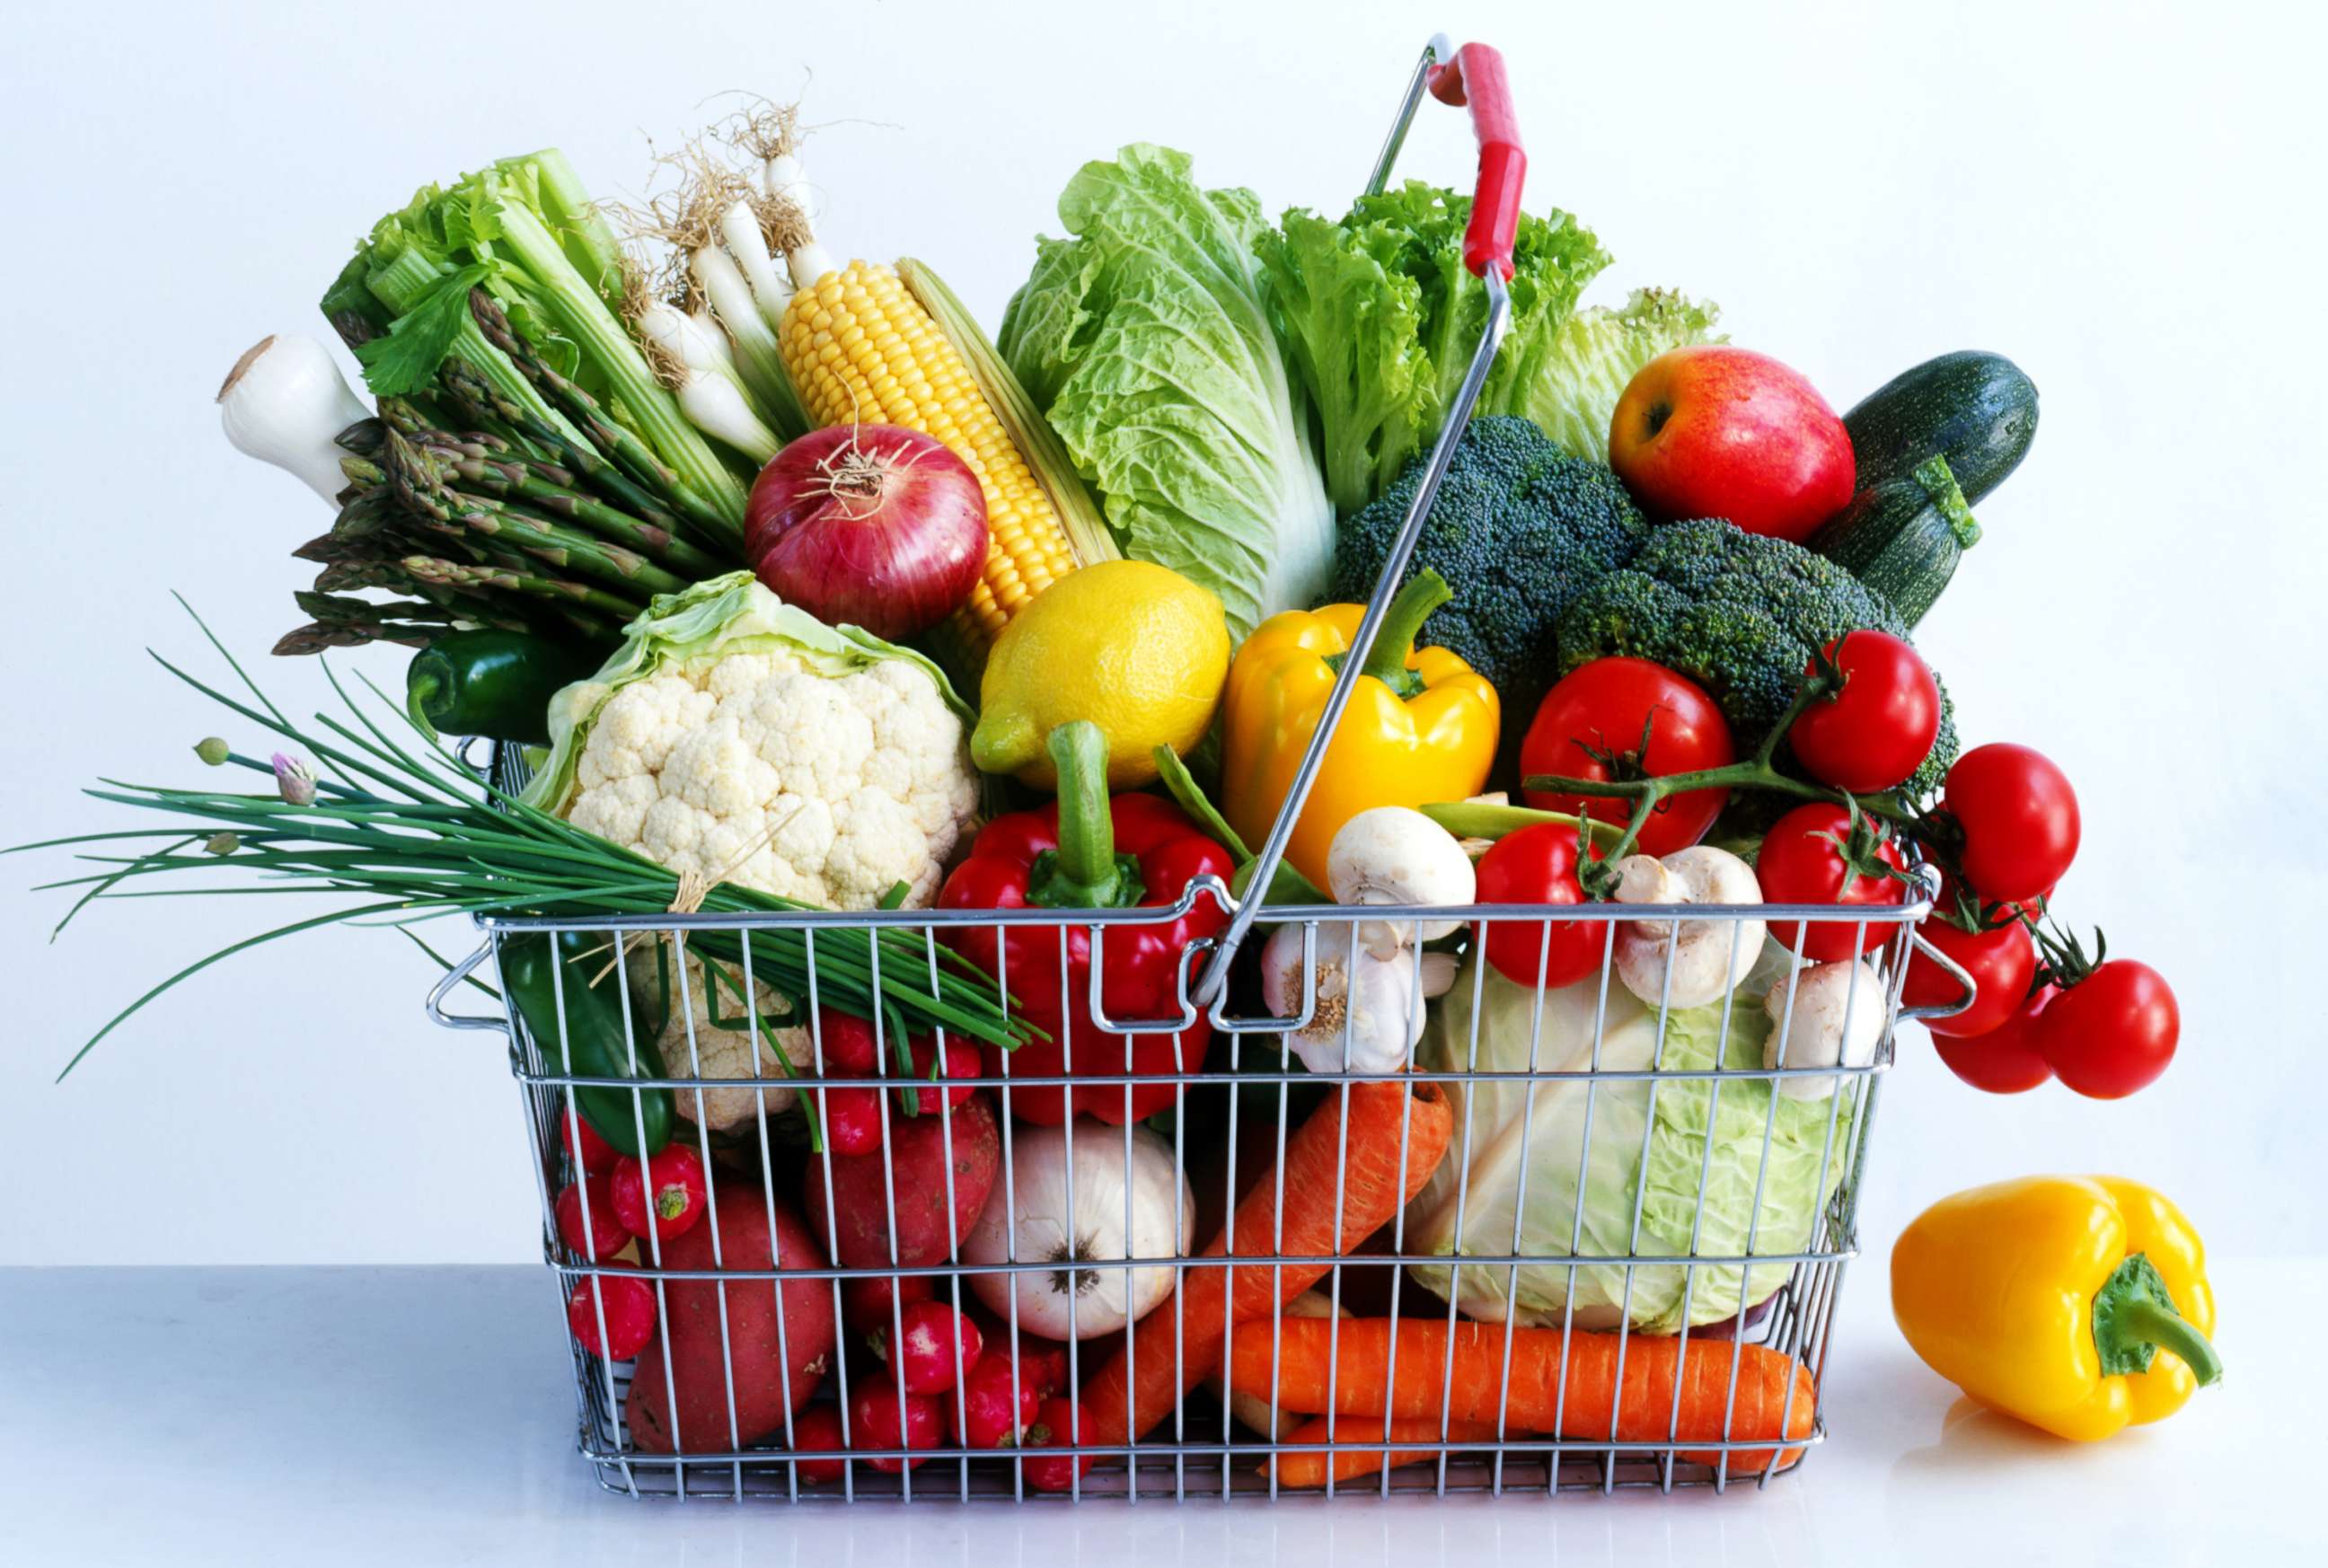 PHOTO: Assorted vegetables in a shopping basket are pictured in this undated stock photo.